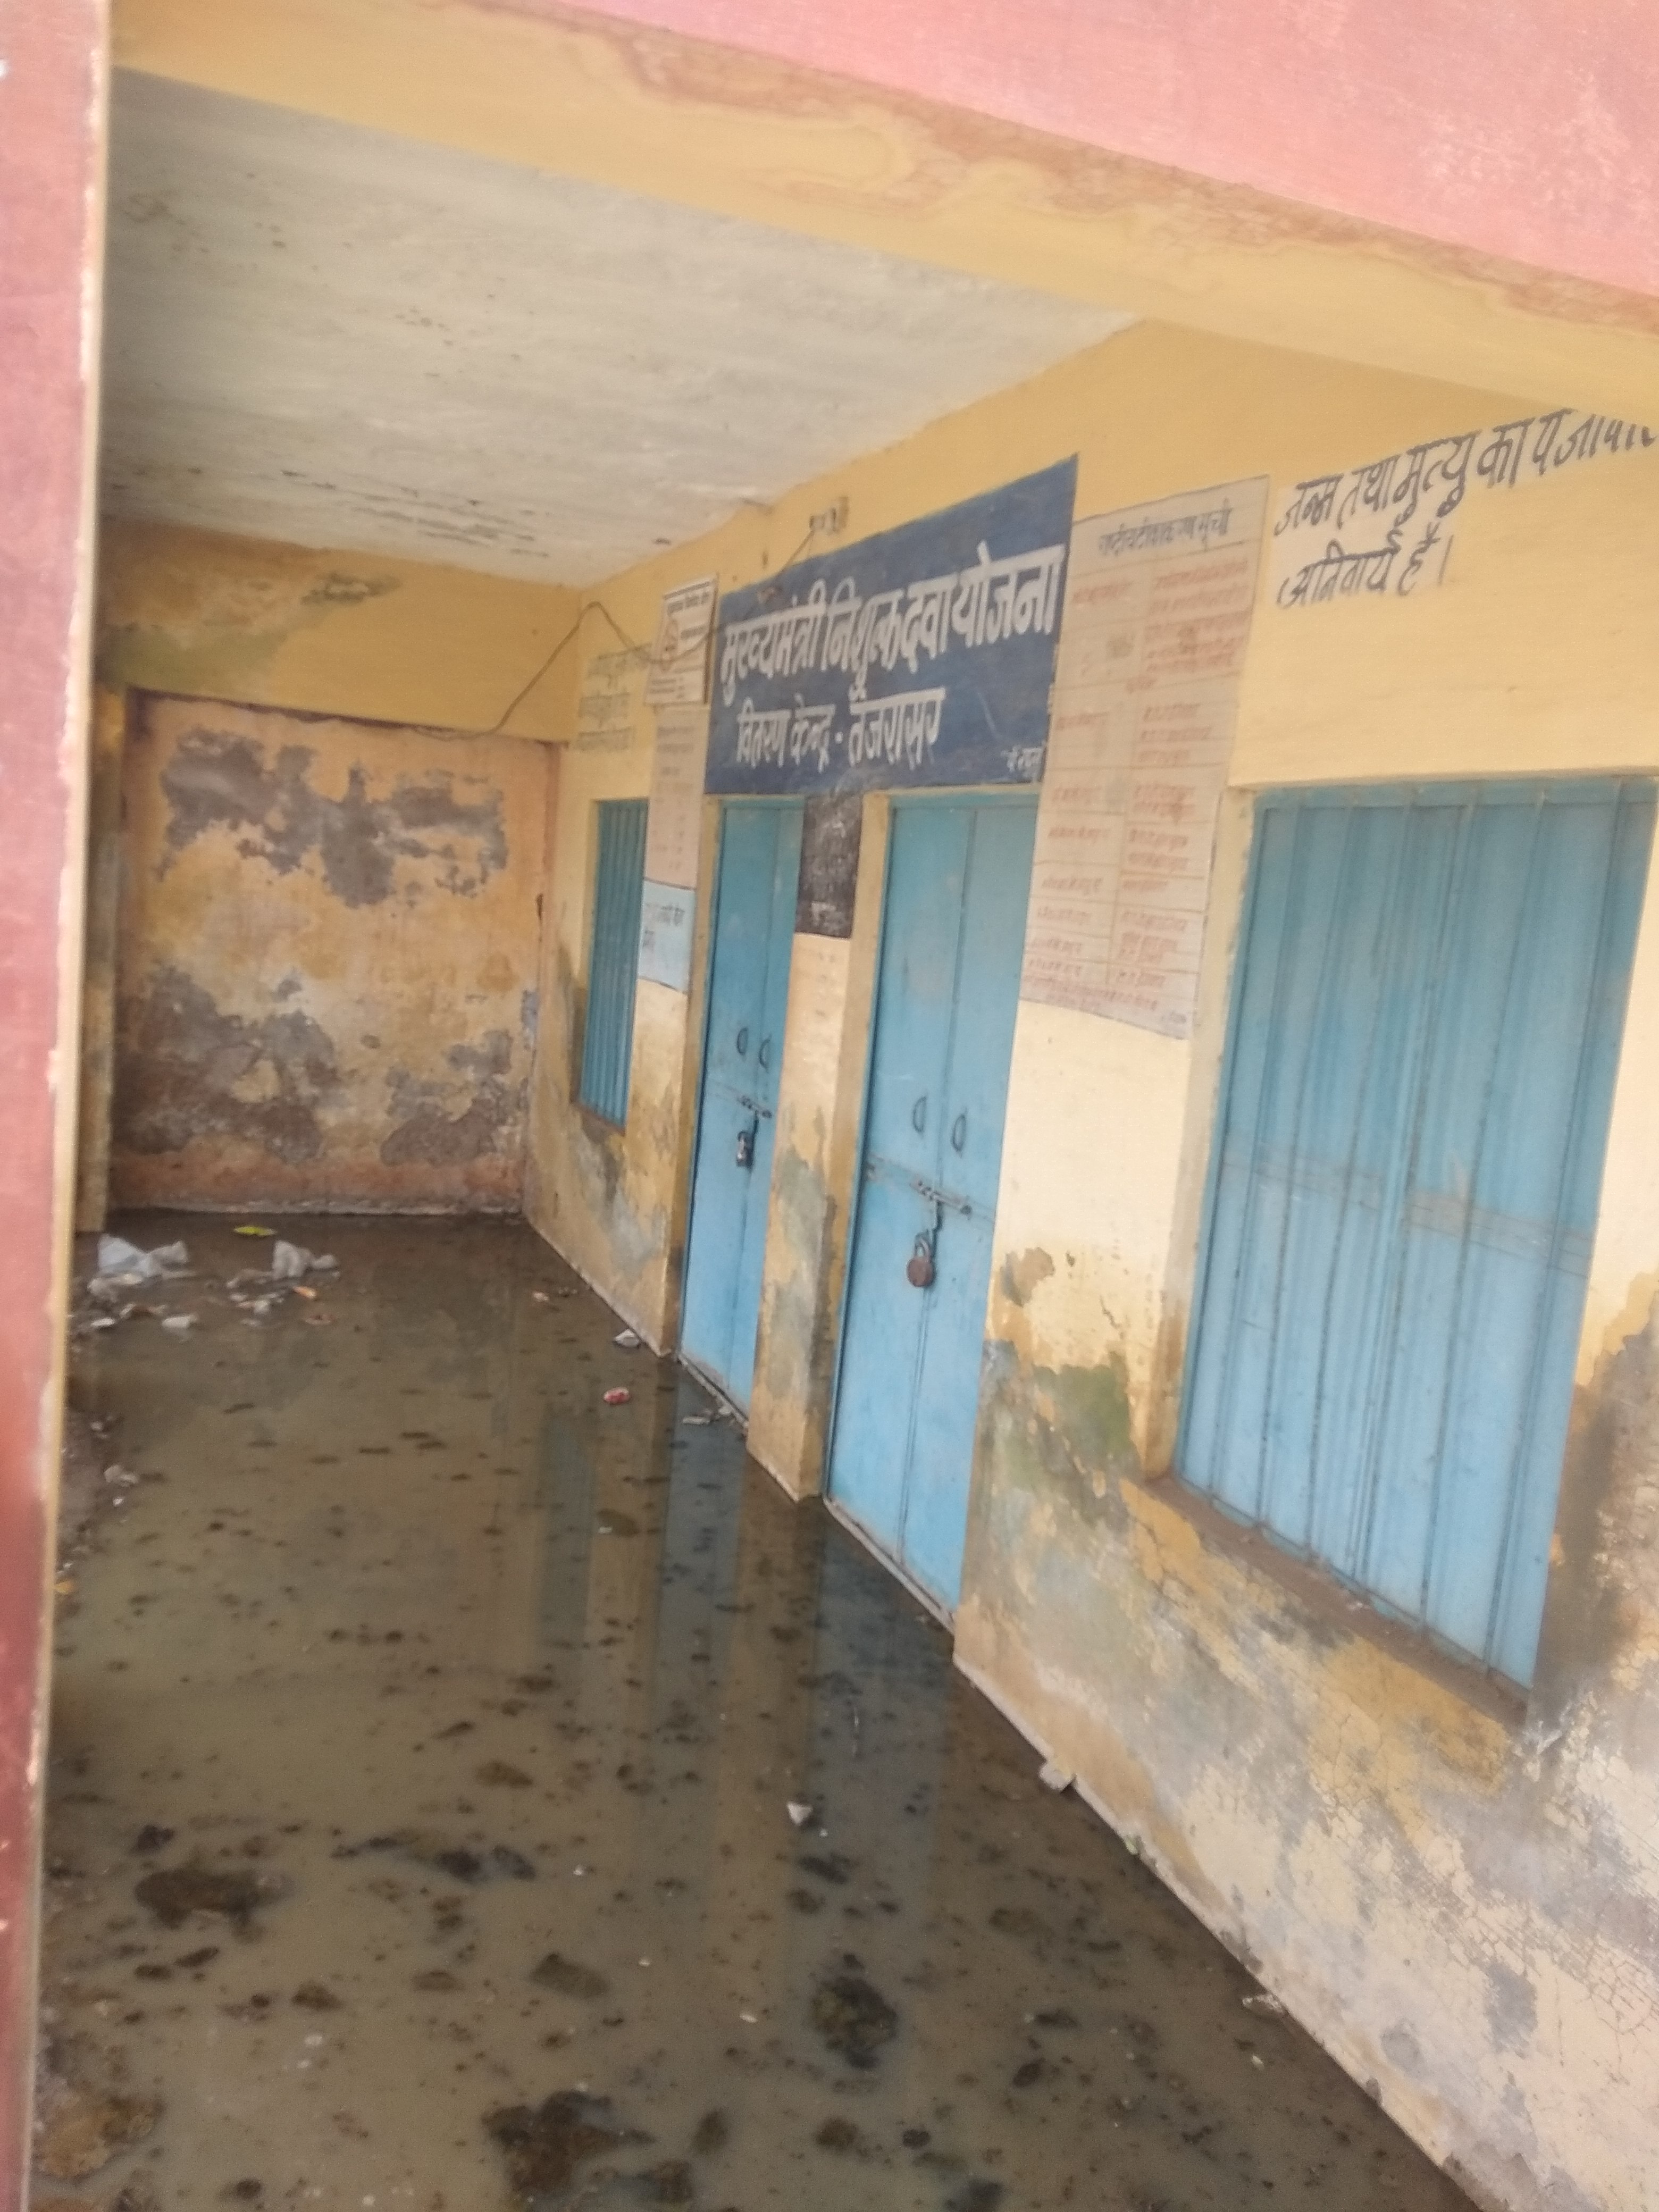 The sub-health center itself is ill, dirty water canker